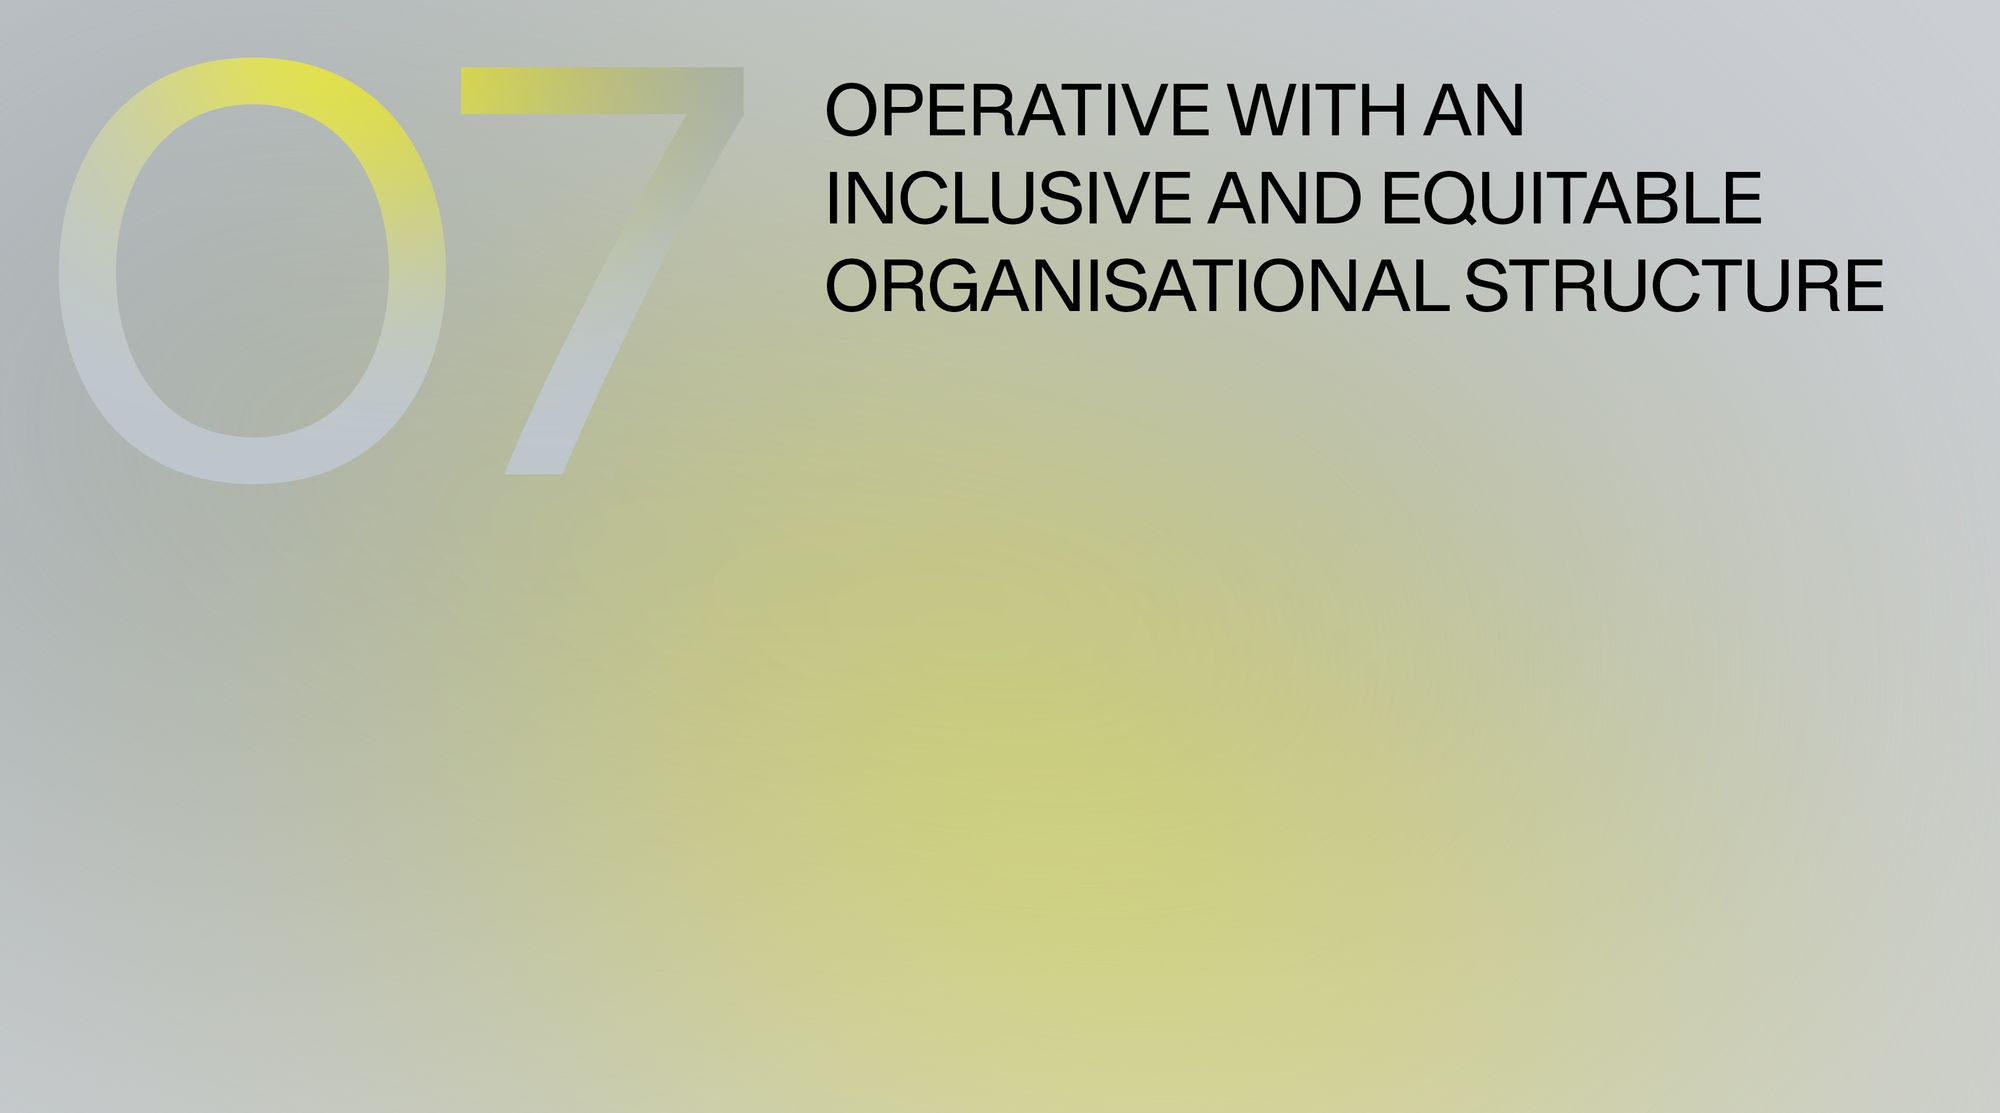 Operate with an inclusive and equitable organisational structure.